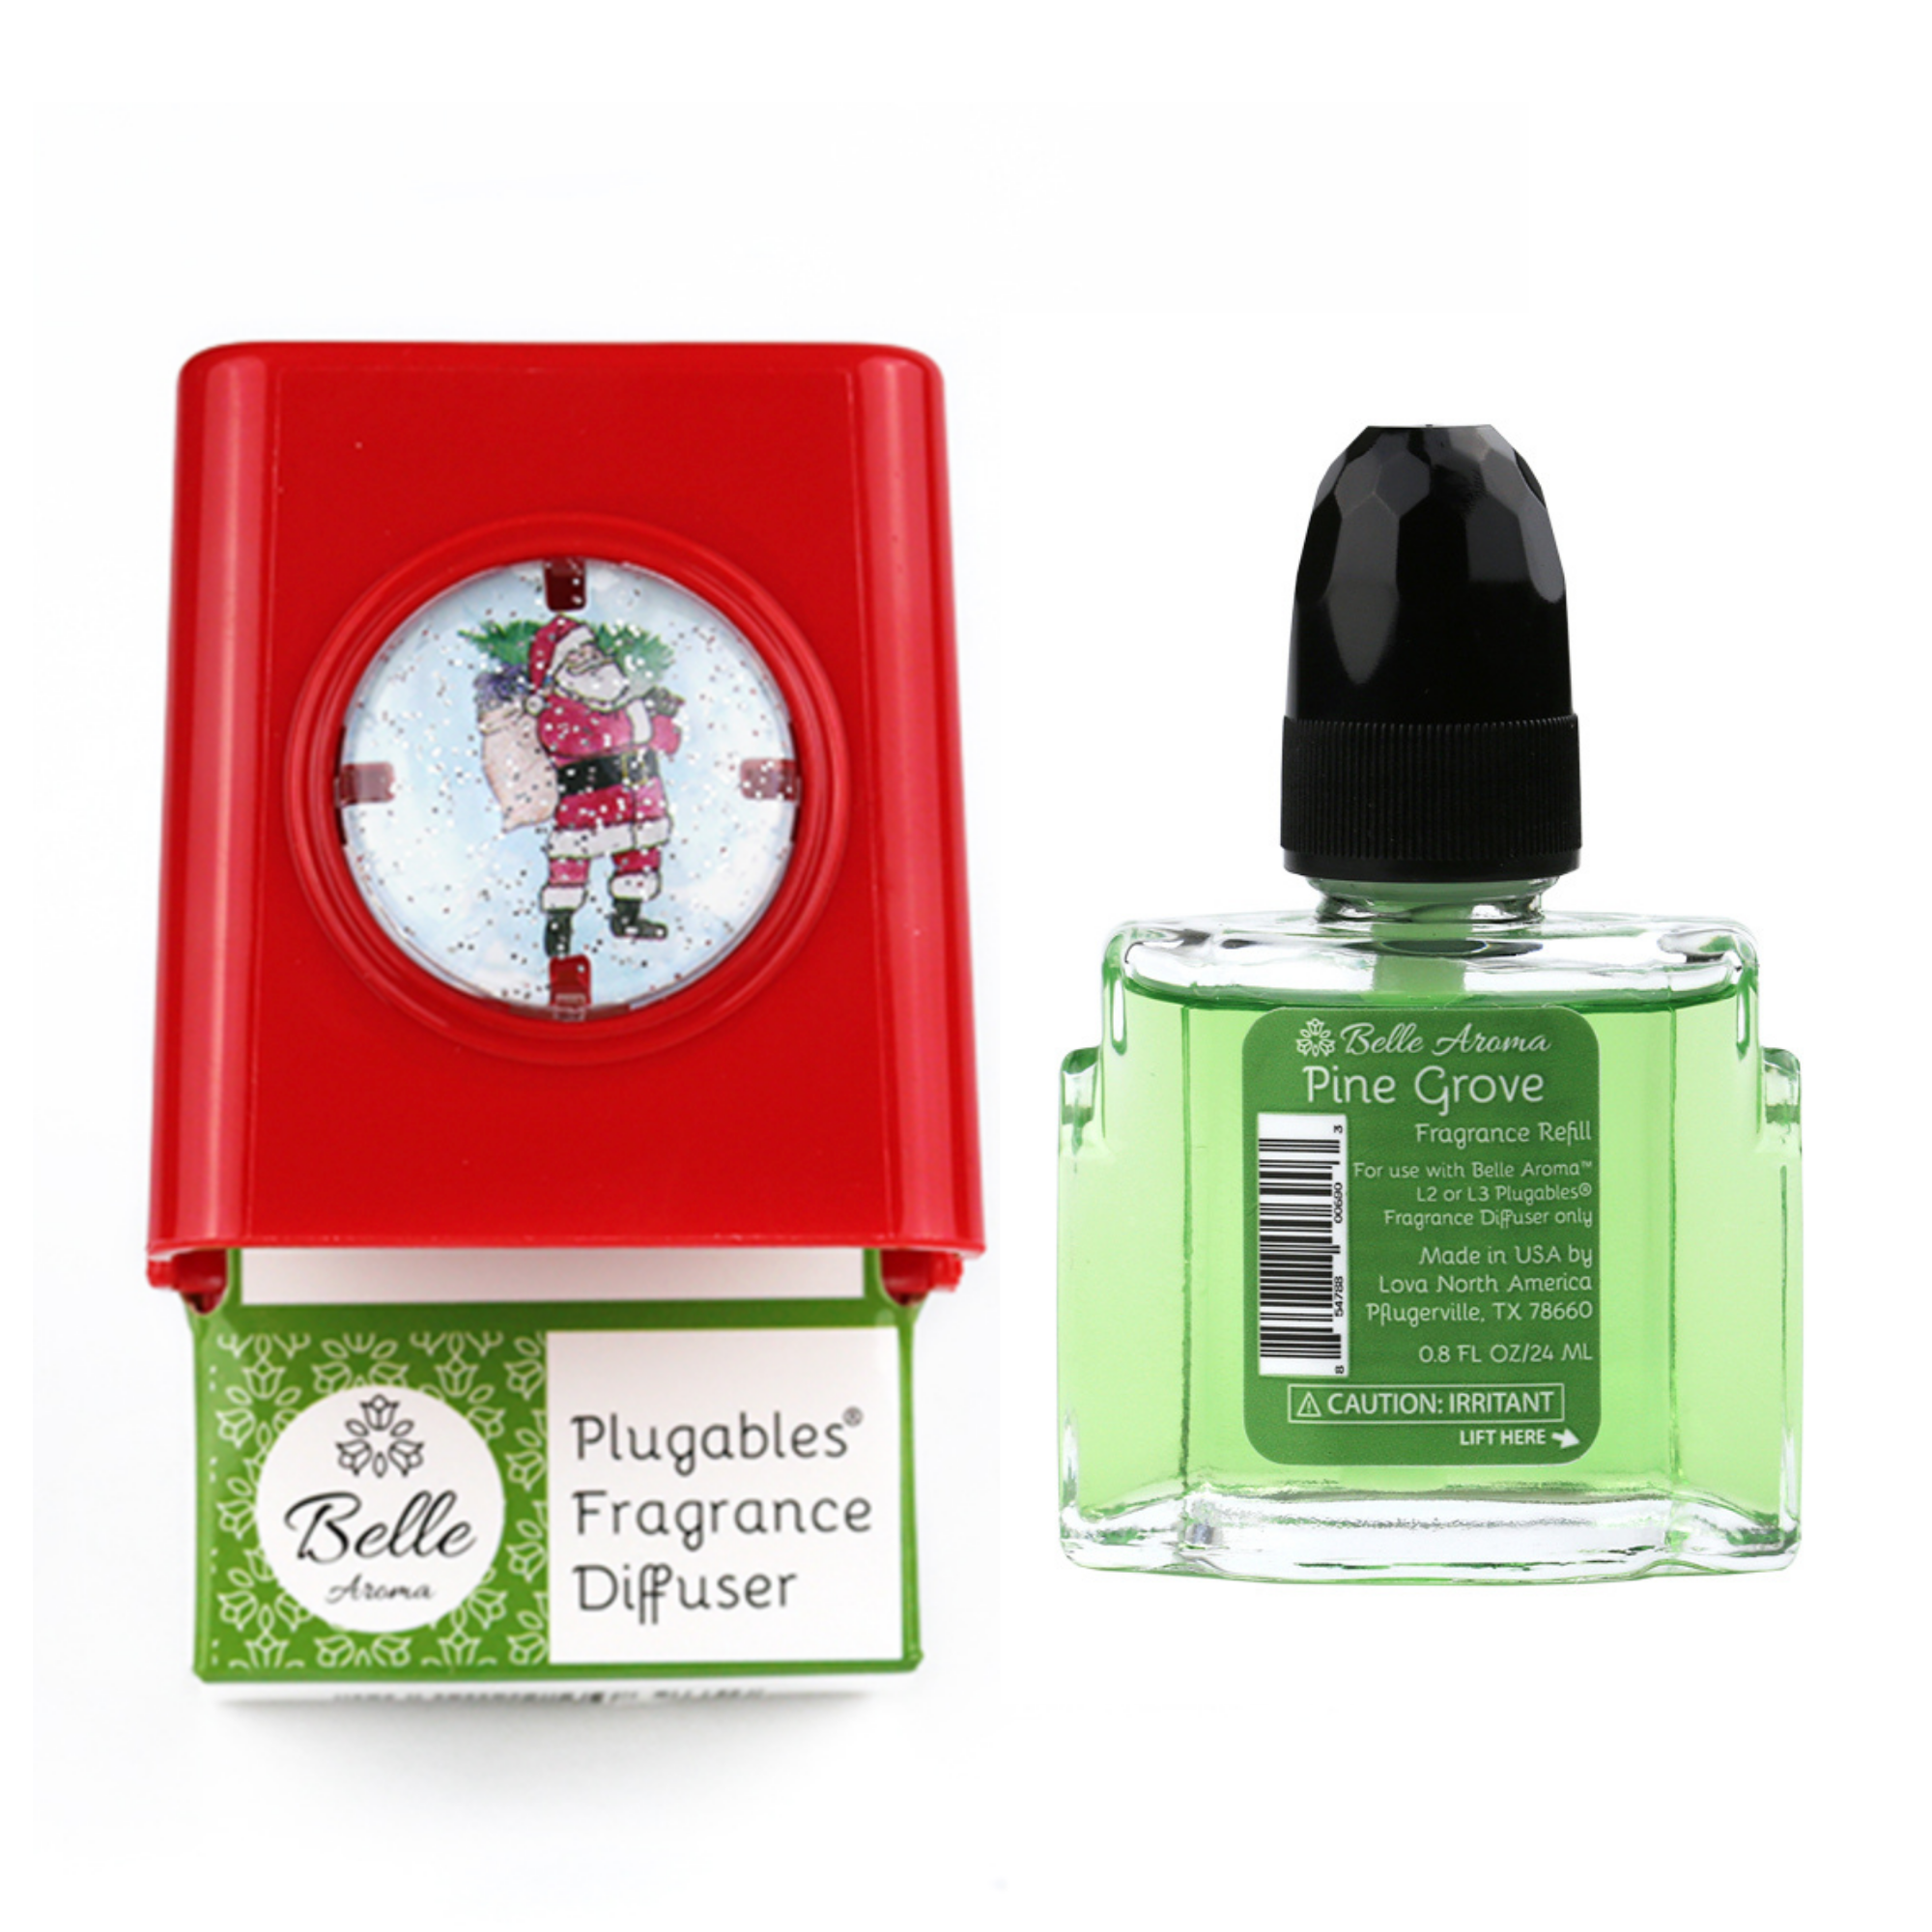 Glitter Domes™ Plugables® Electric Scented Oil Diffuser - Santa with Pine Grove Fragrance Oil Home Fragrance Accessories